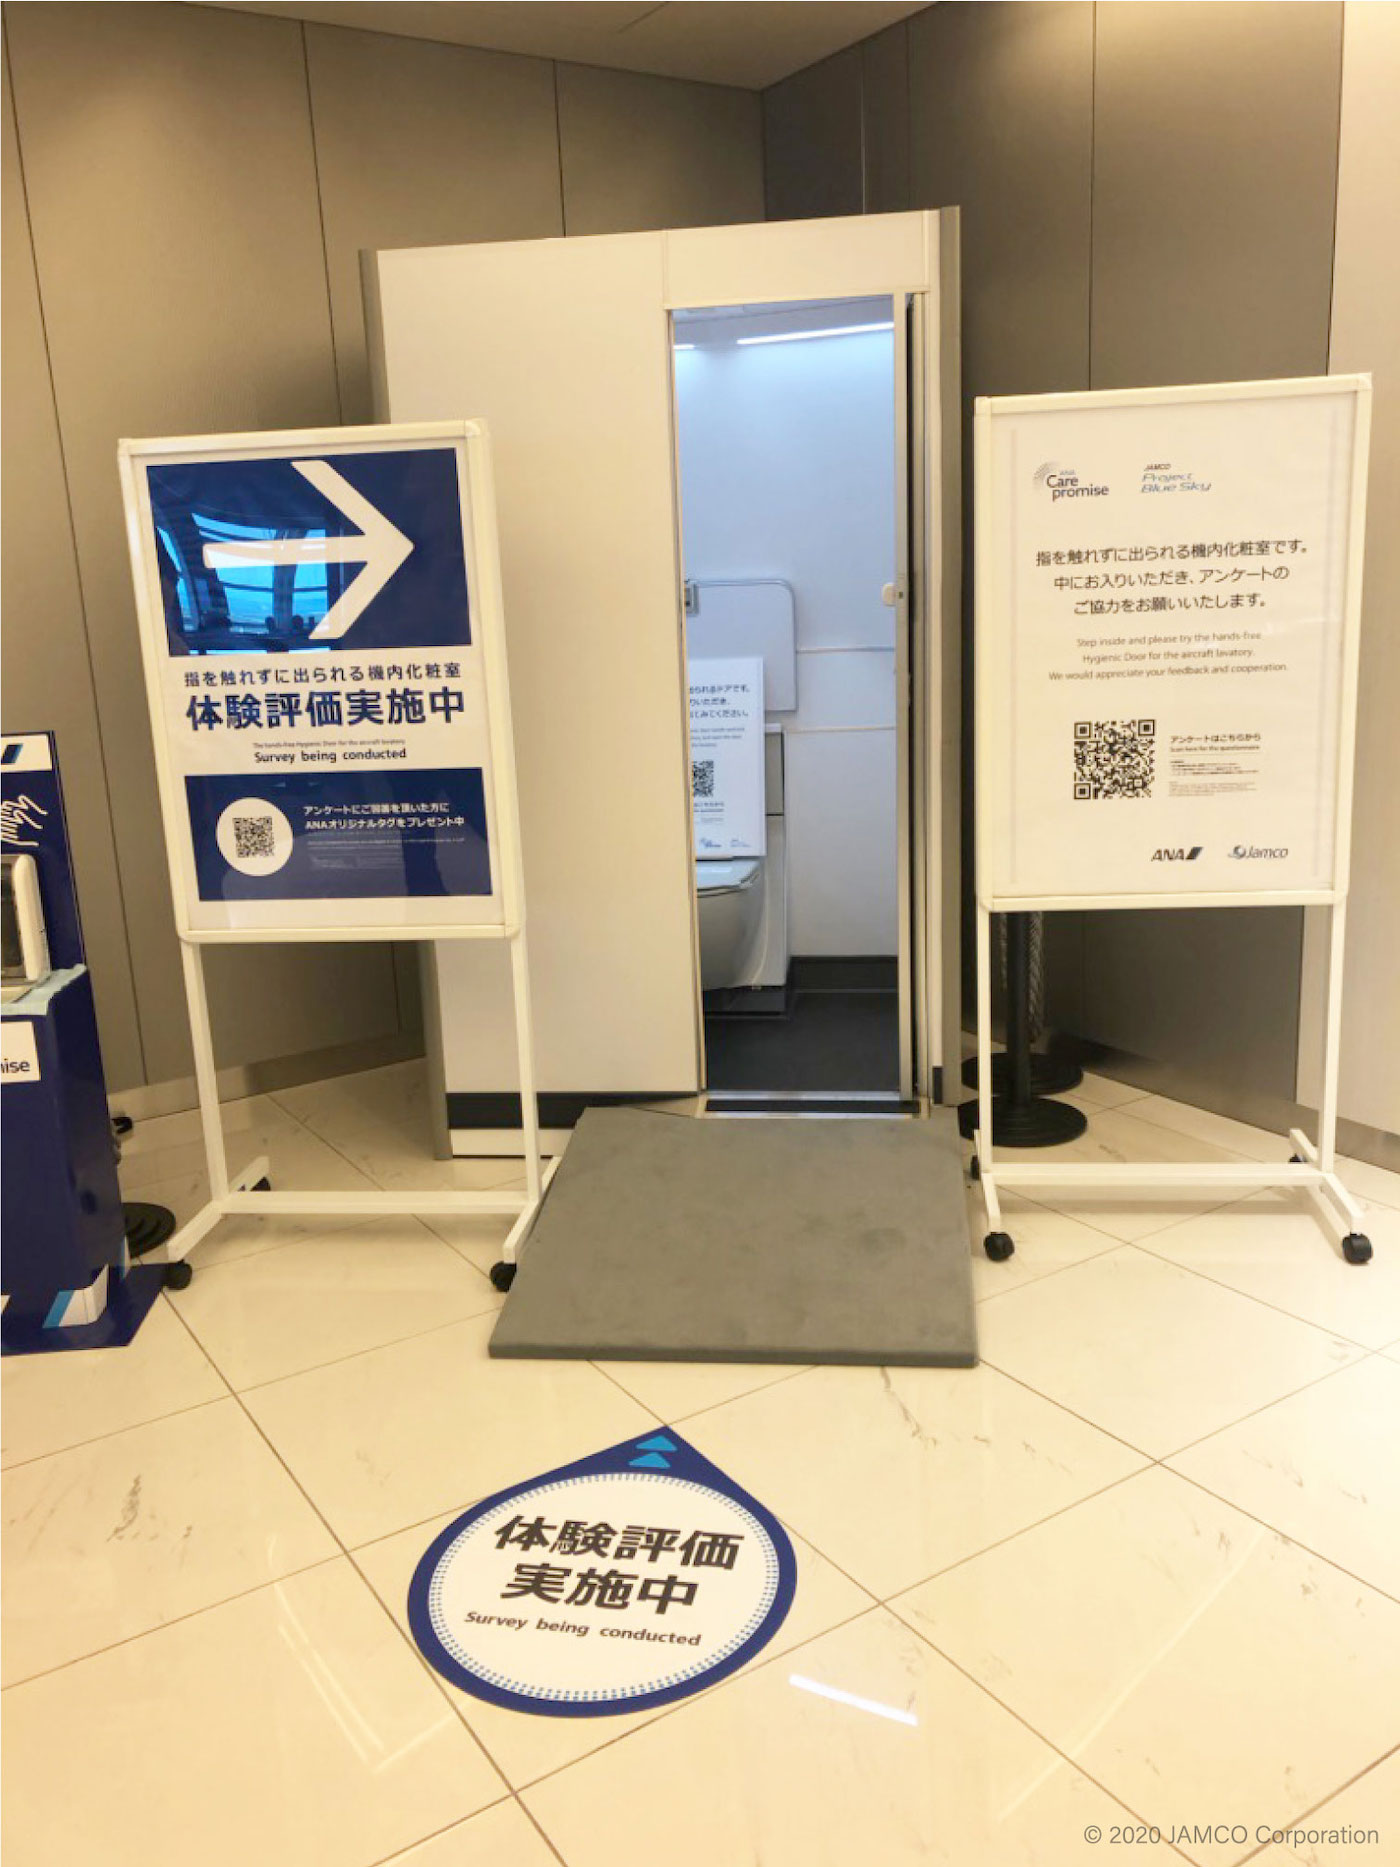 The touchless lavatory door was rolled out for testing at Tokyo Haneda Airport in August